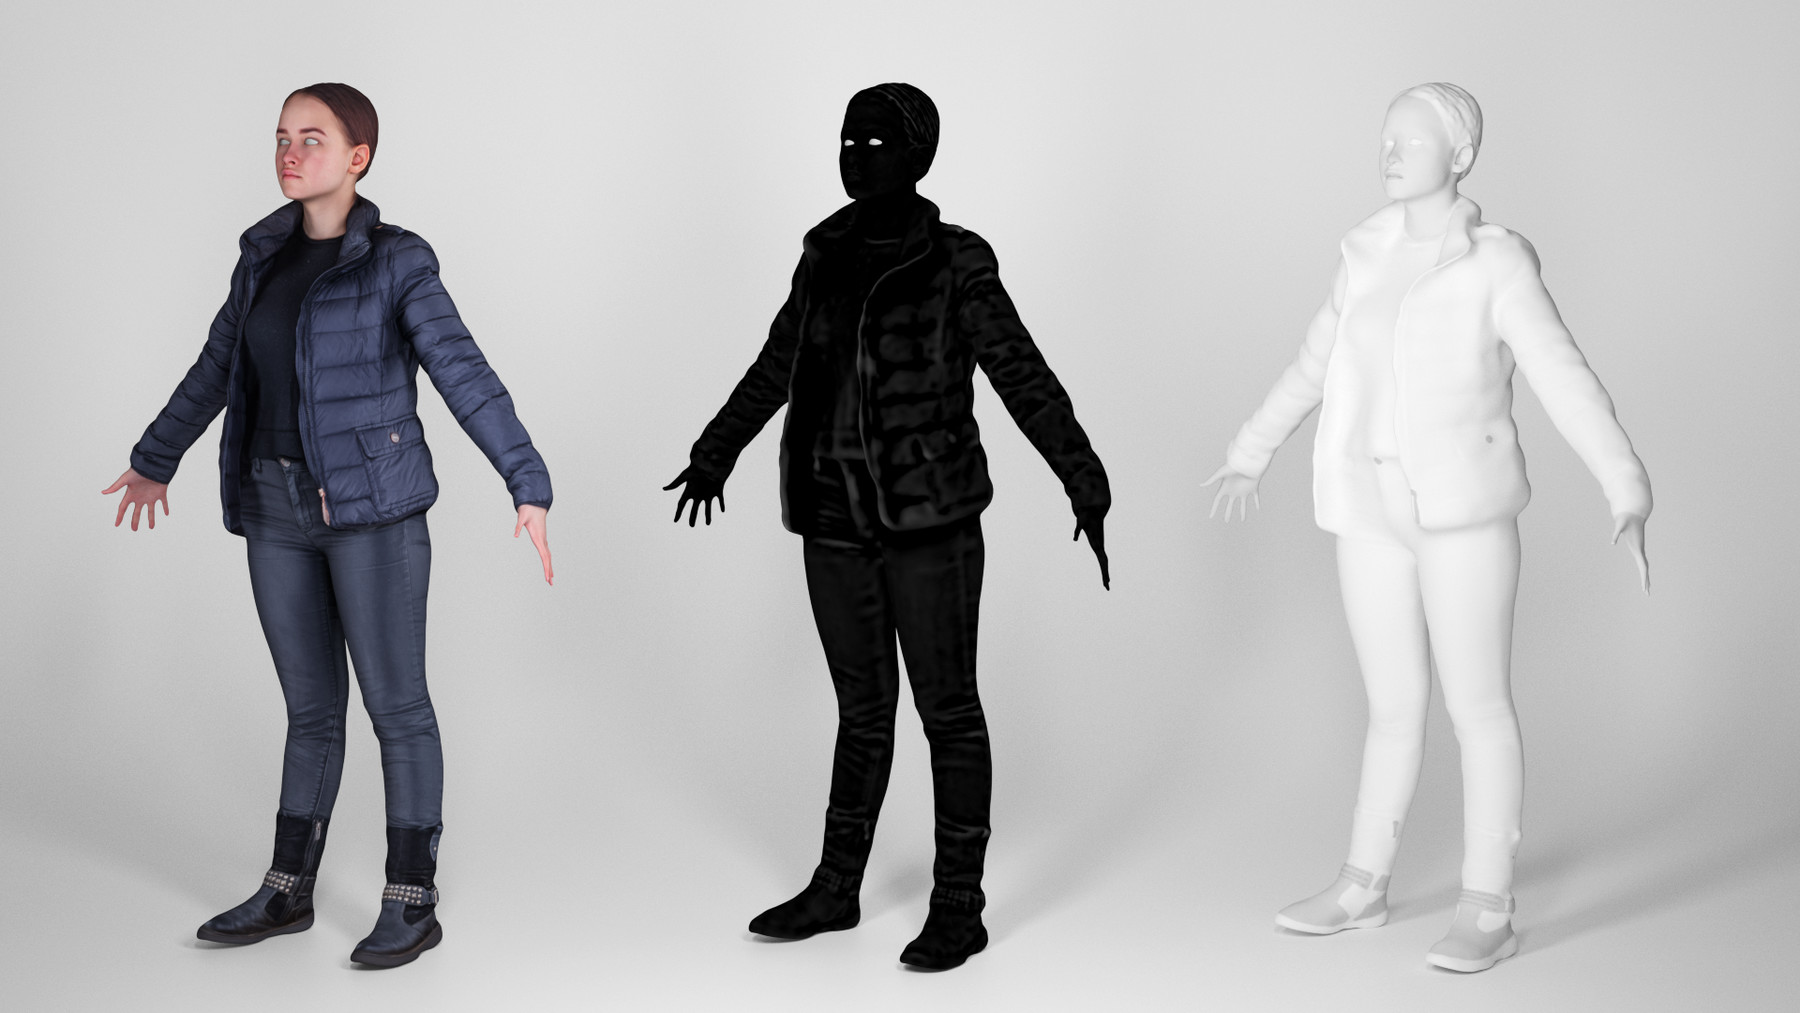 ArtStation - Woman street style in A-pose 122 | Game Assets